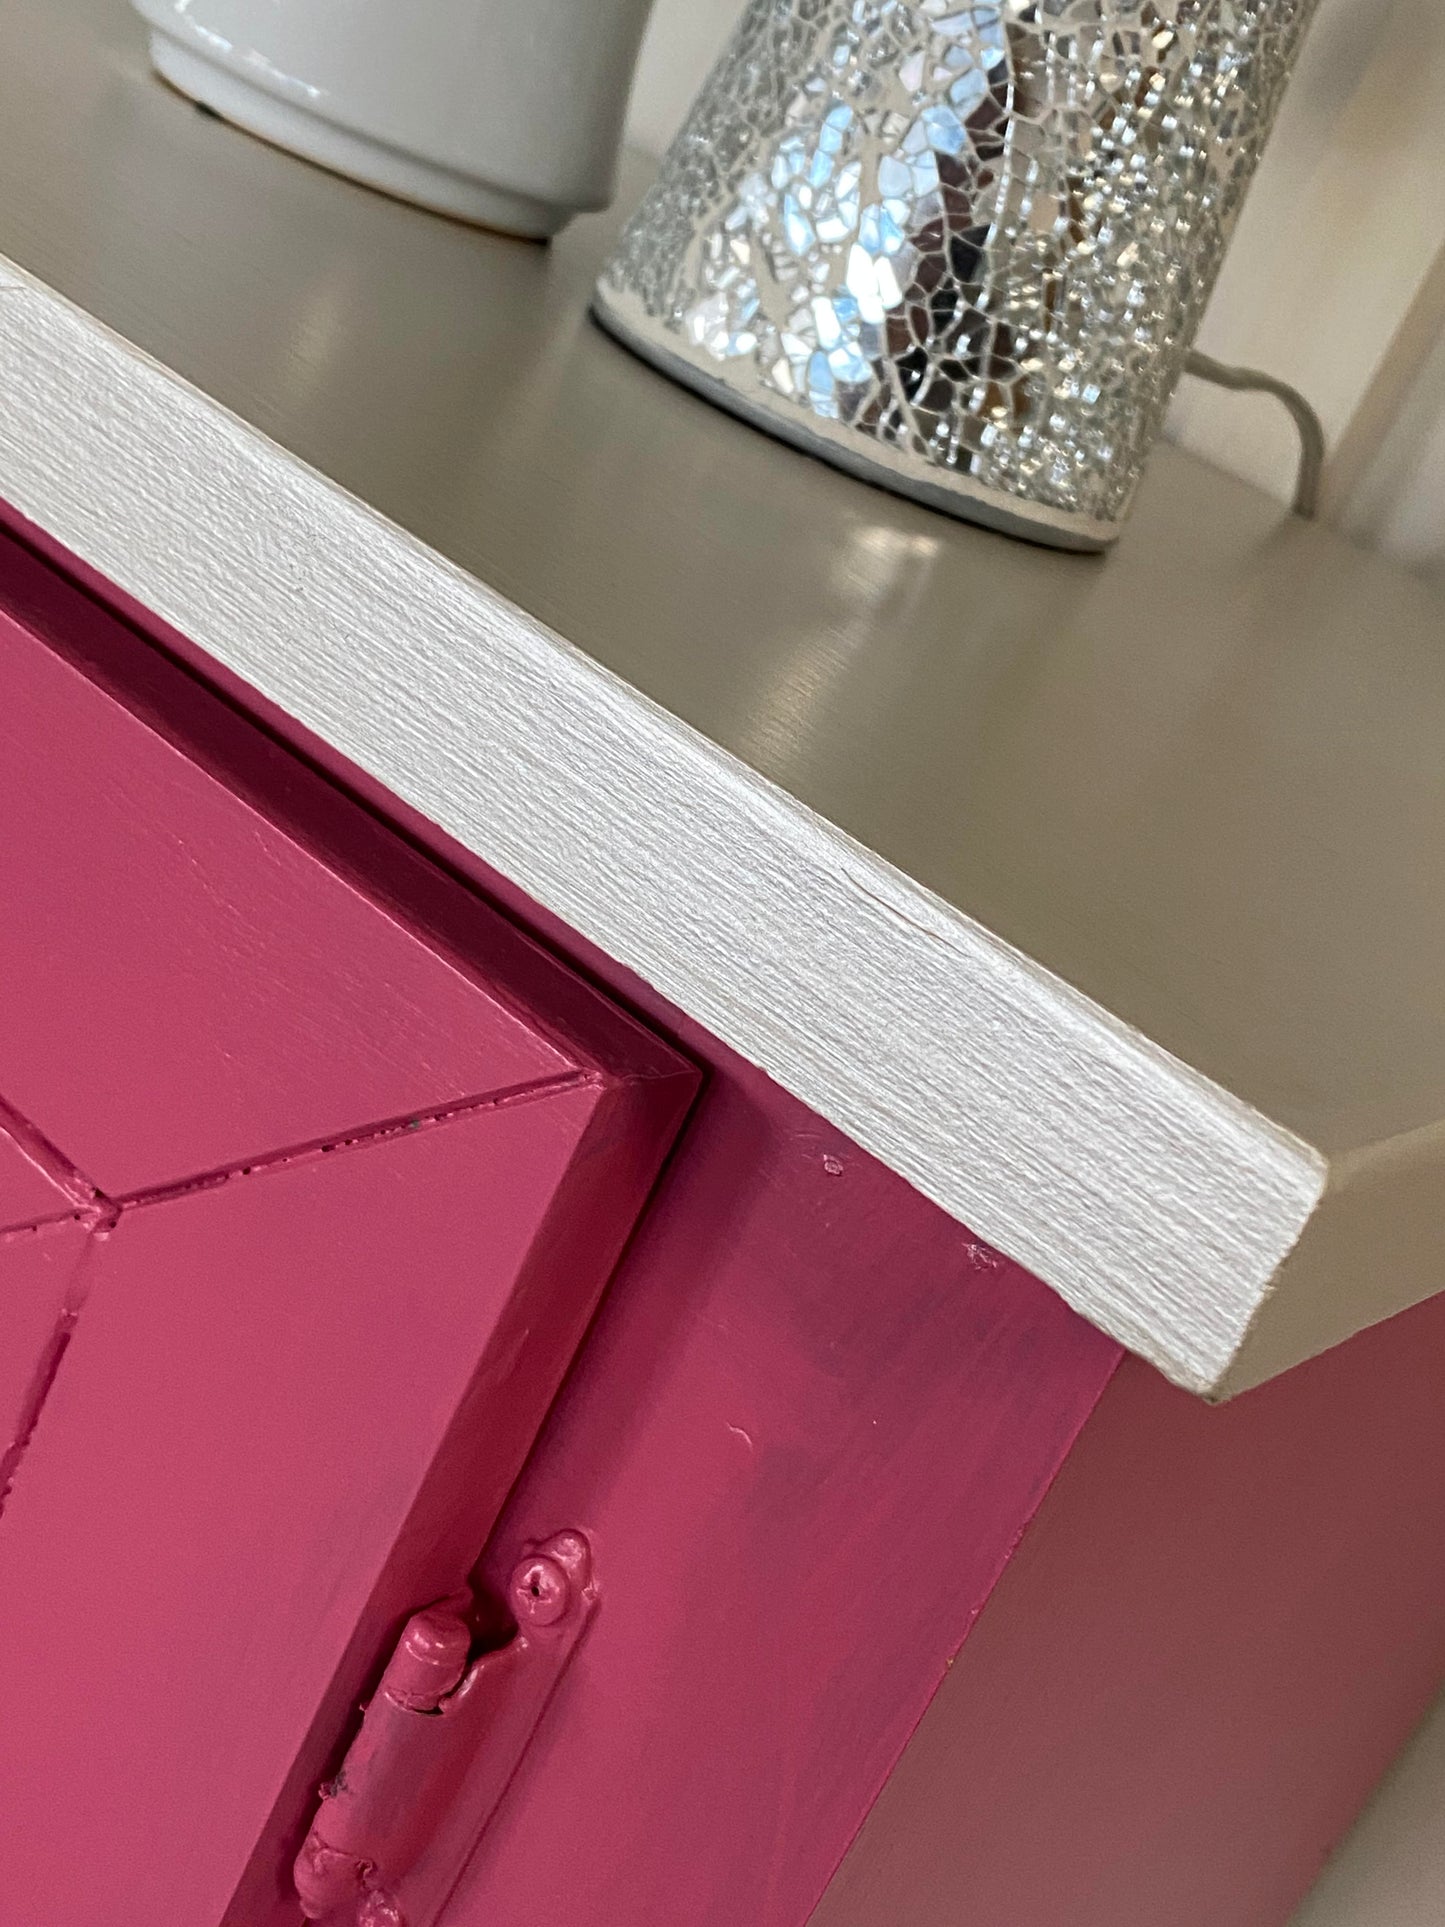 Flamingo Furniture and Cabinet Paint